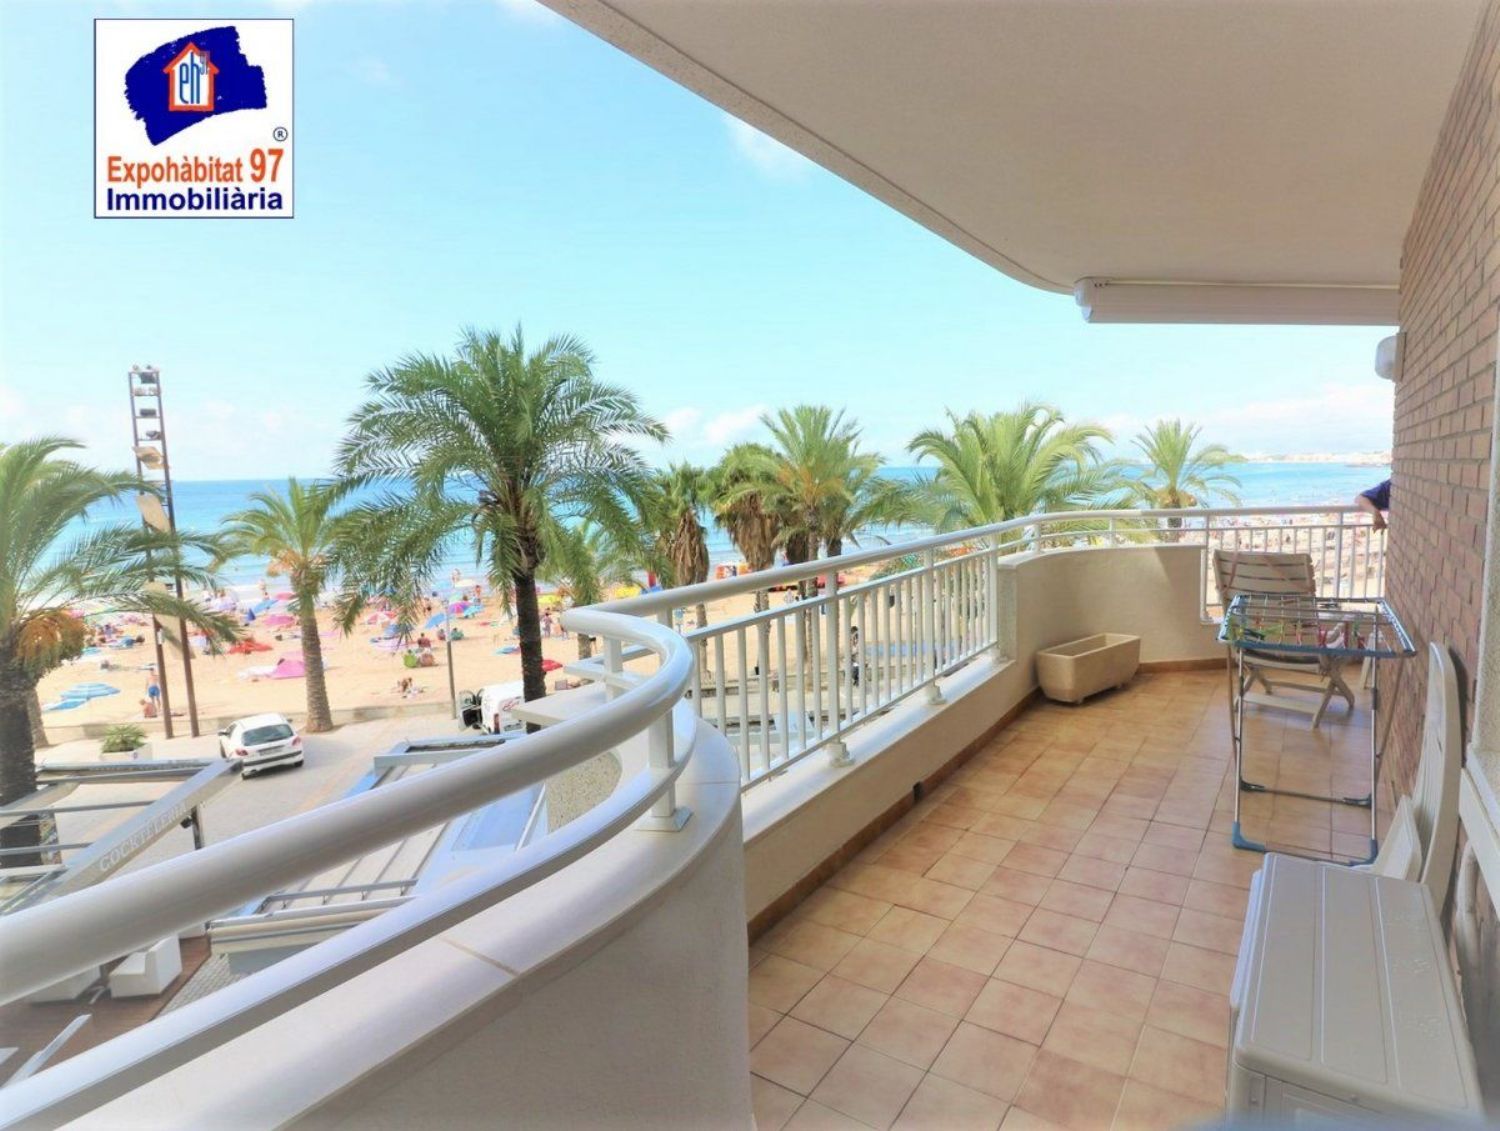 Apartment for sale on the seafront on Brussel·les street, in Salou